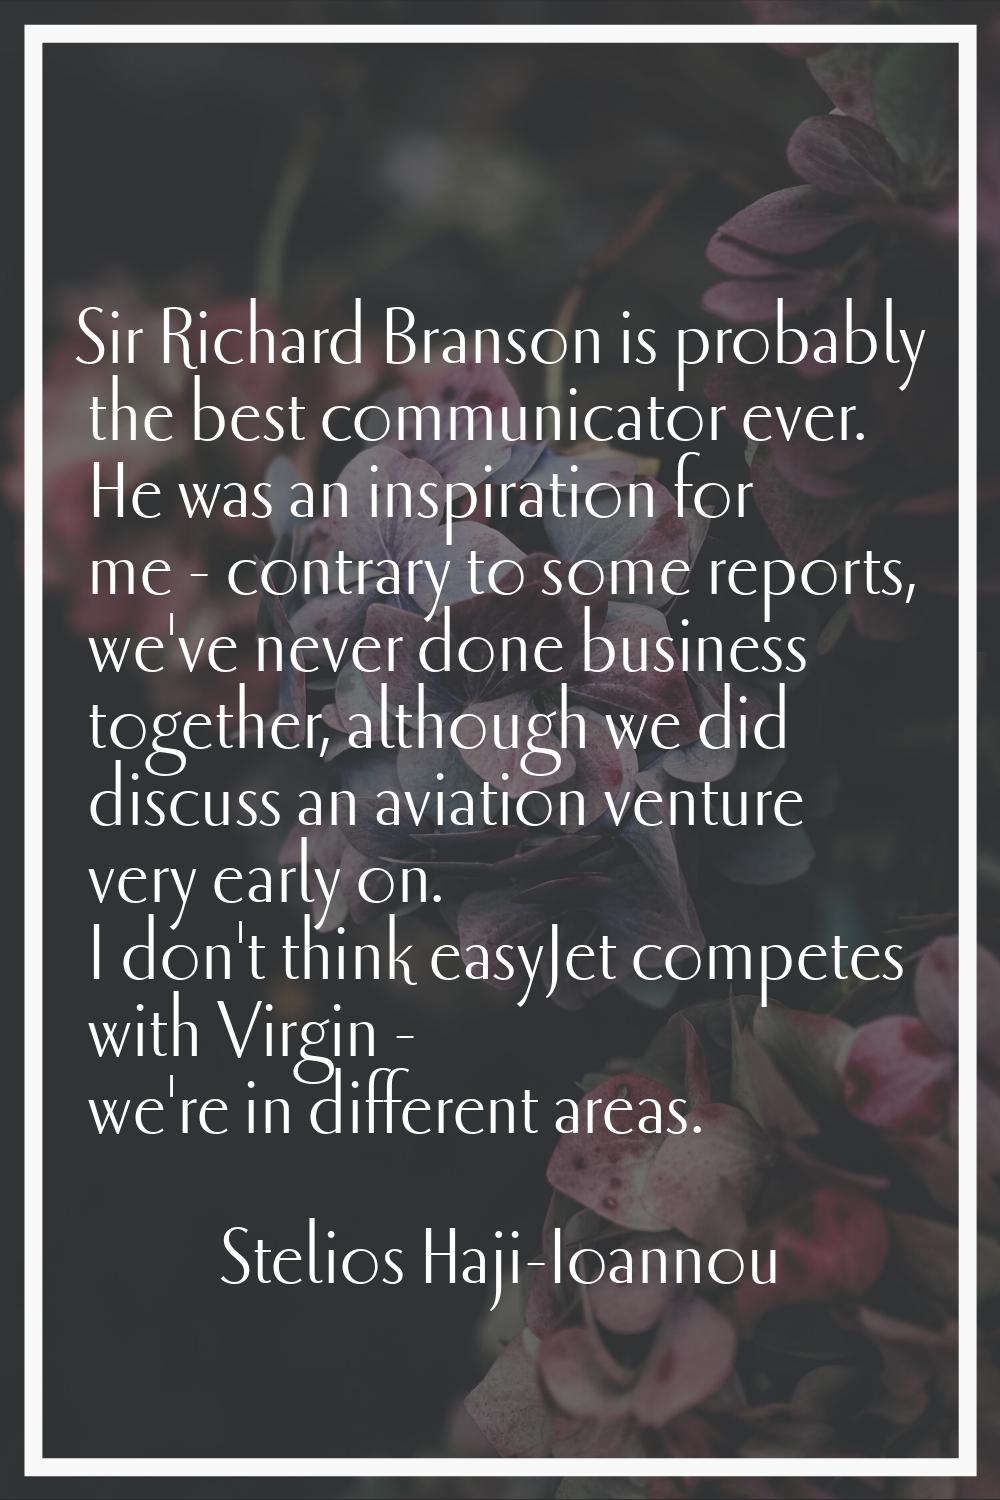 Sir Richard Branson is probably the best communicator ever. He was an inspiration for me - contrary